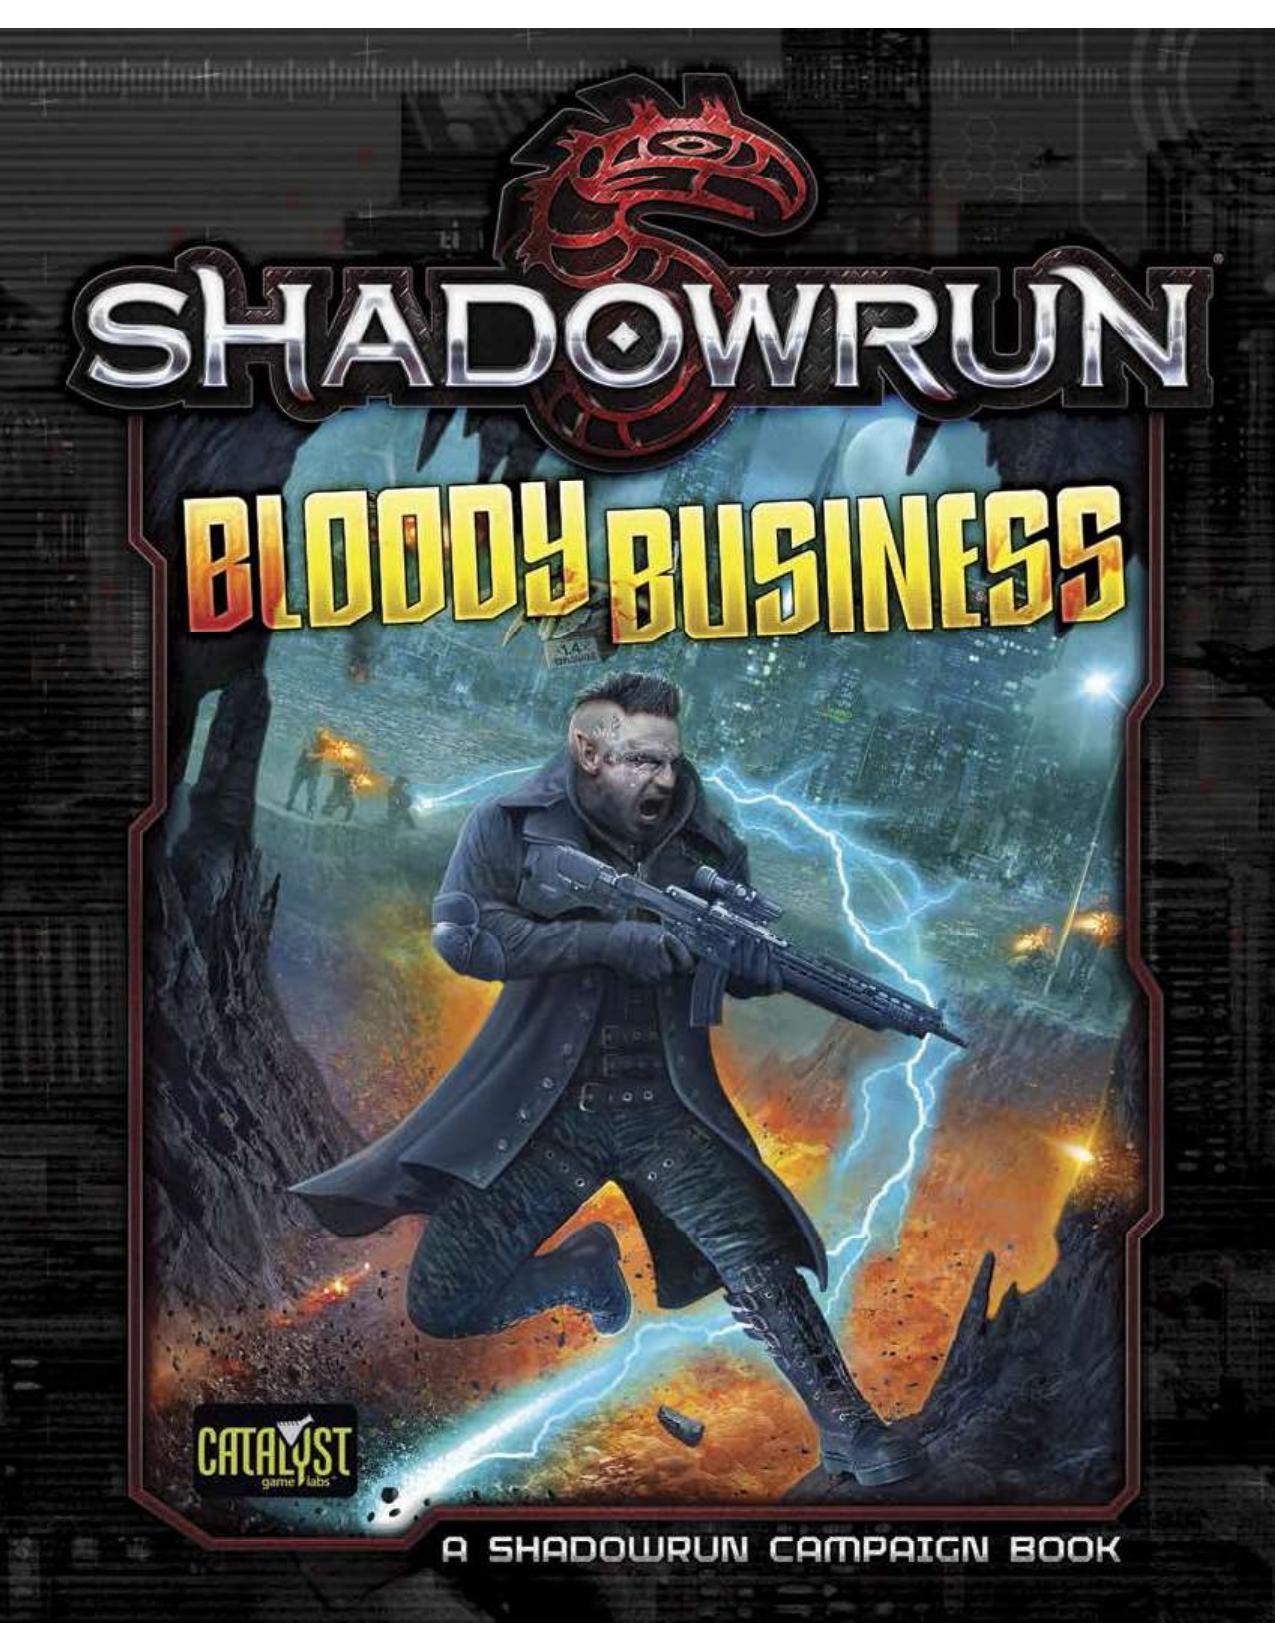 C:\Users\Administration\Documents\Shadowrun\Shadowrun 5e\Bloody Business.xps